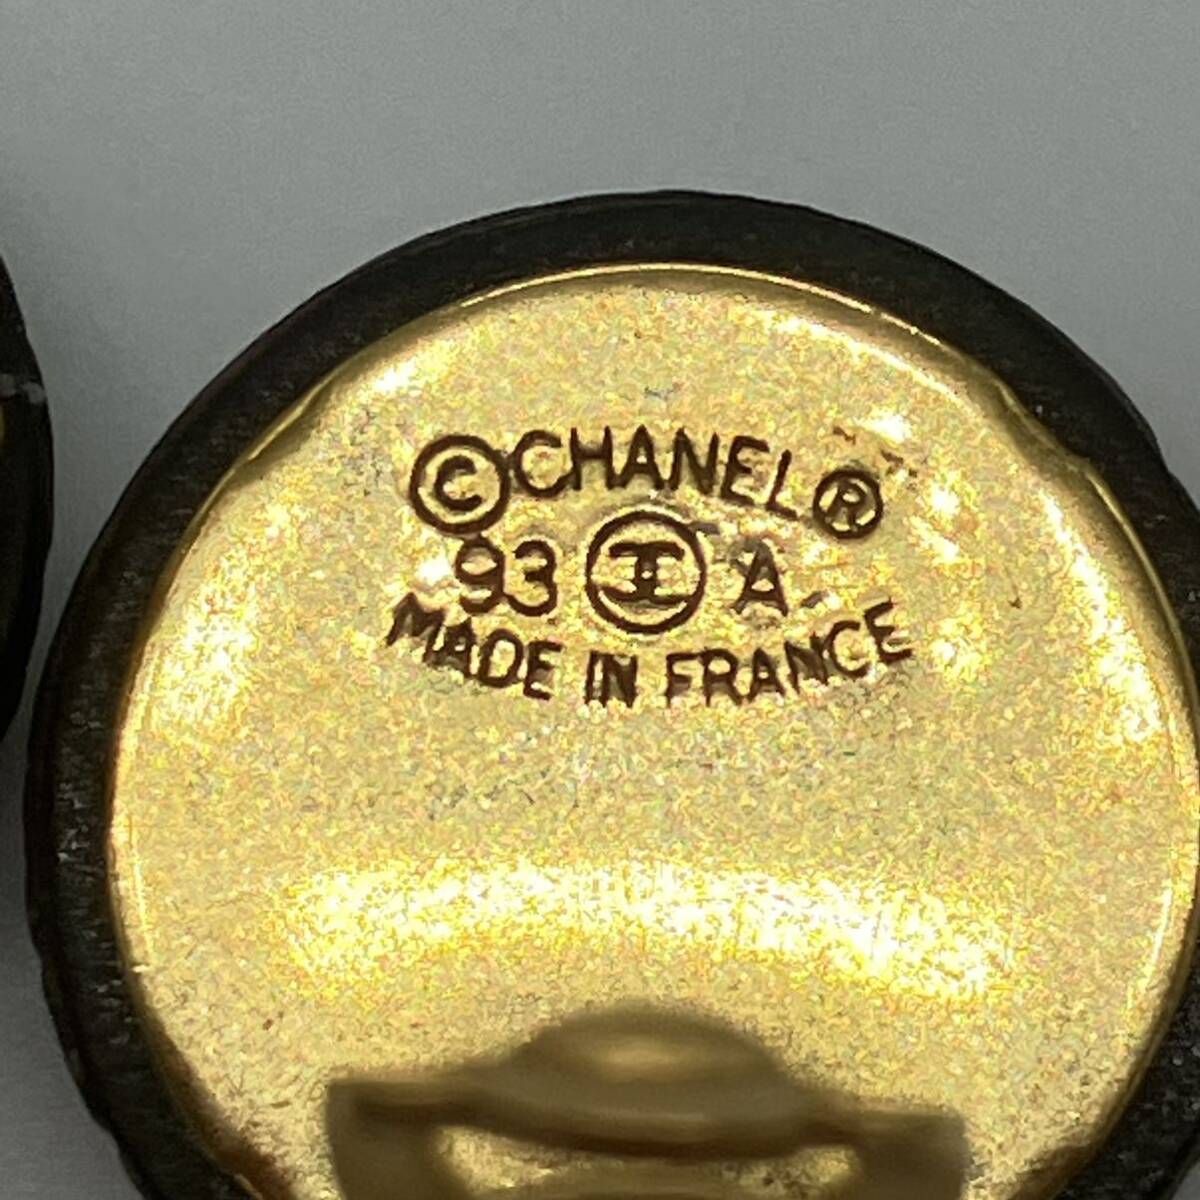 1 jpy ~ 4M [ unused ]CHANEL earrings serial attaching 93A A02600 Y0201B COL Z000Z Gold color Chanel here Mark box attaching black 